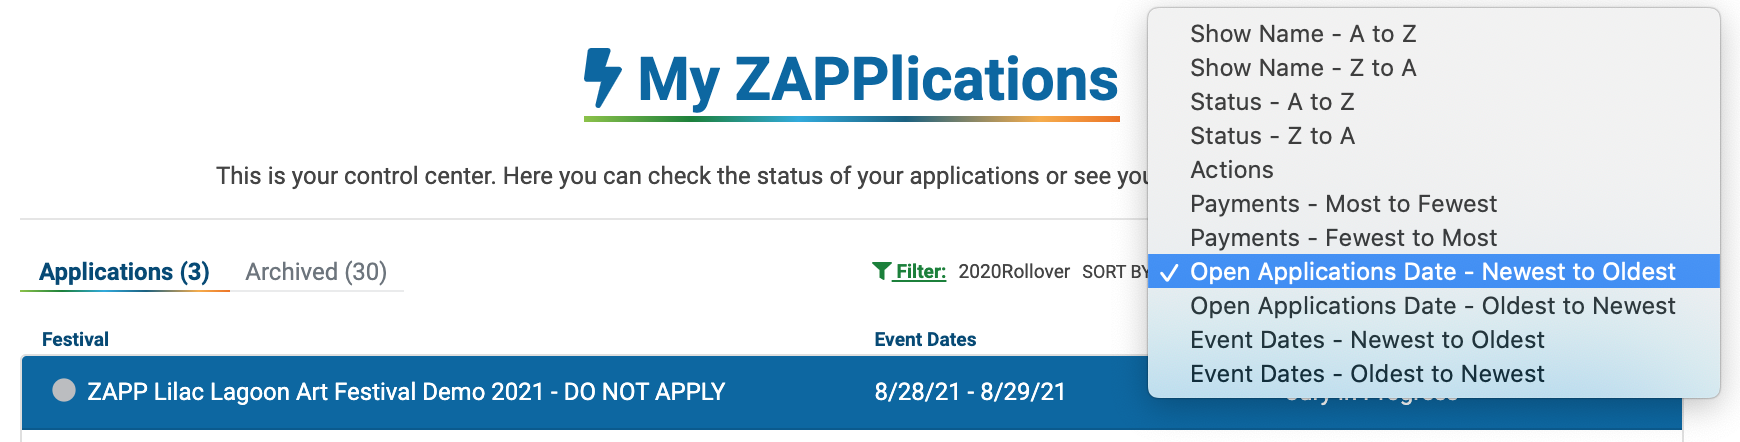 An image of the My ZAPPlications page. The sort by dropdown is open and sorting by Application Open Date is selected.